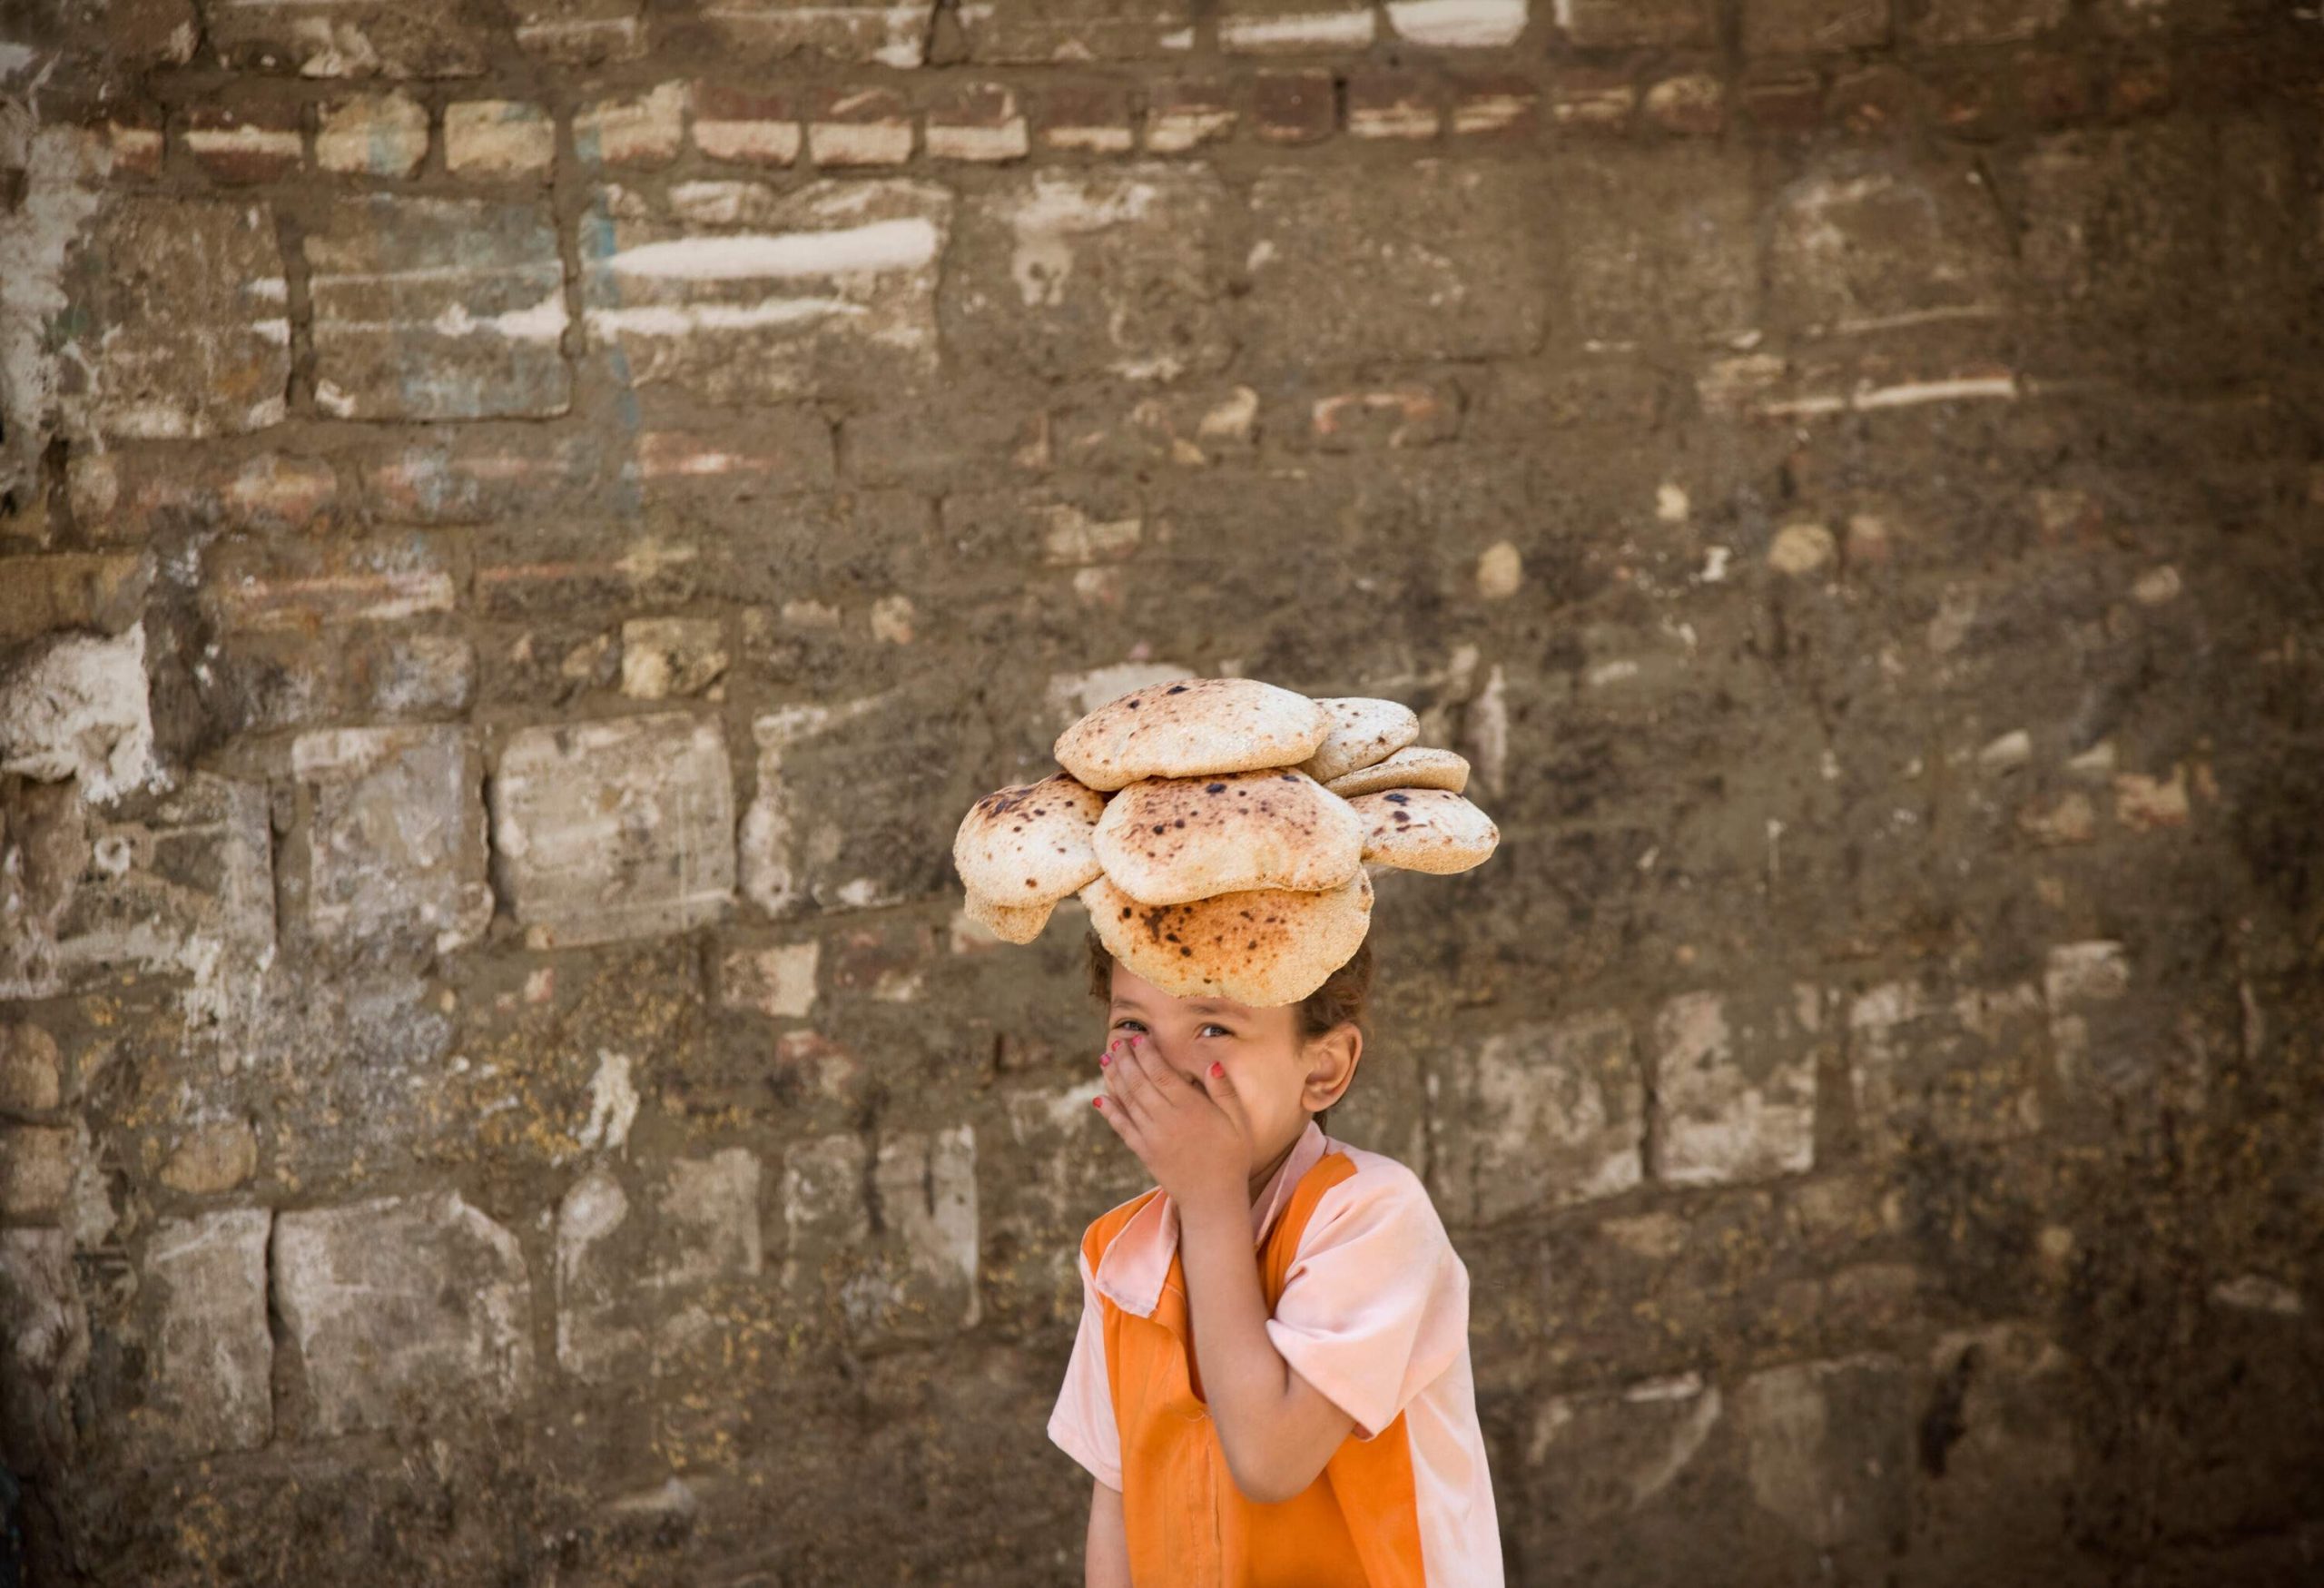 A girl smiles and covers her mouth as she carries a bundle of bread on her head.